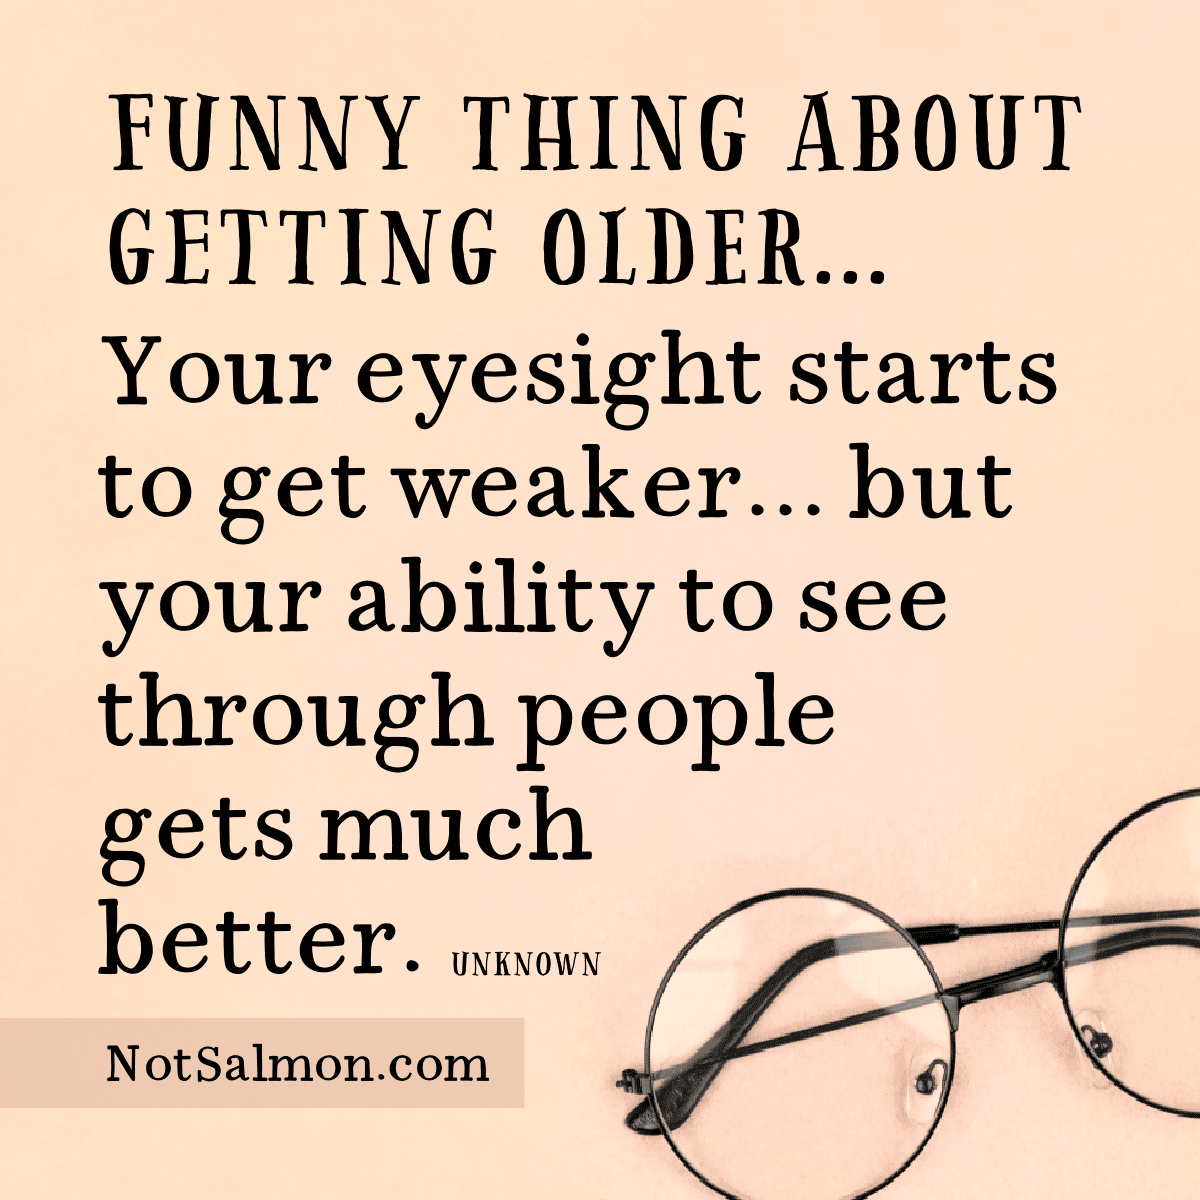 eyesight gets weaker ability to see through people better